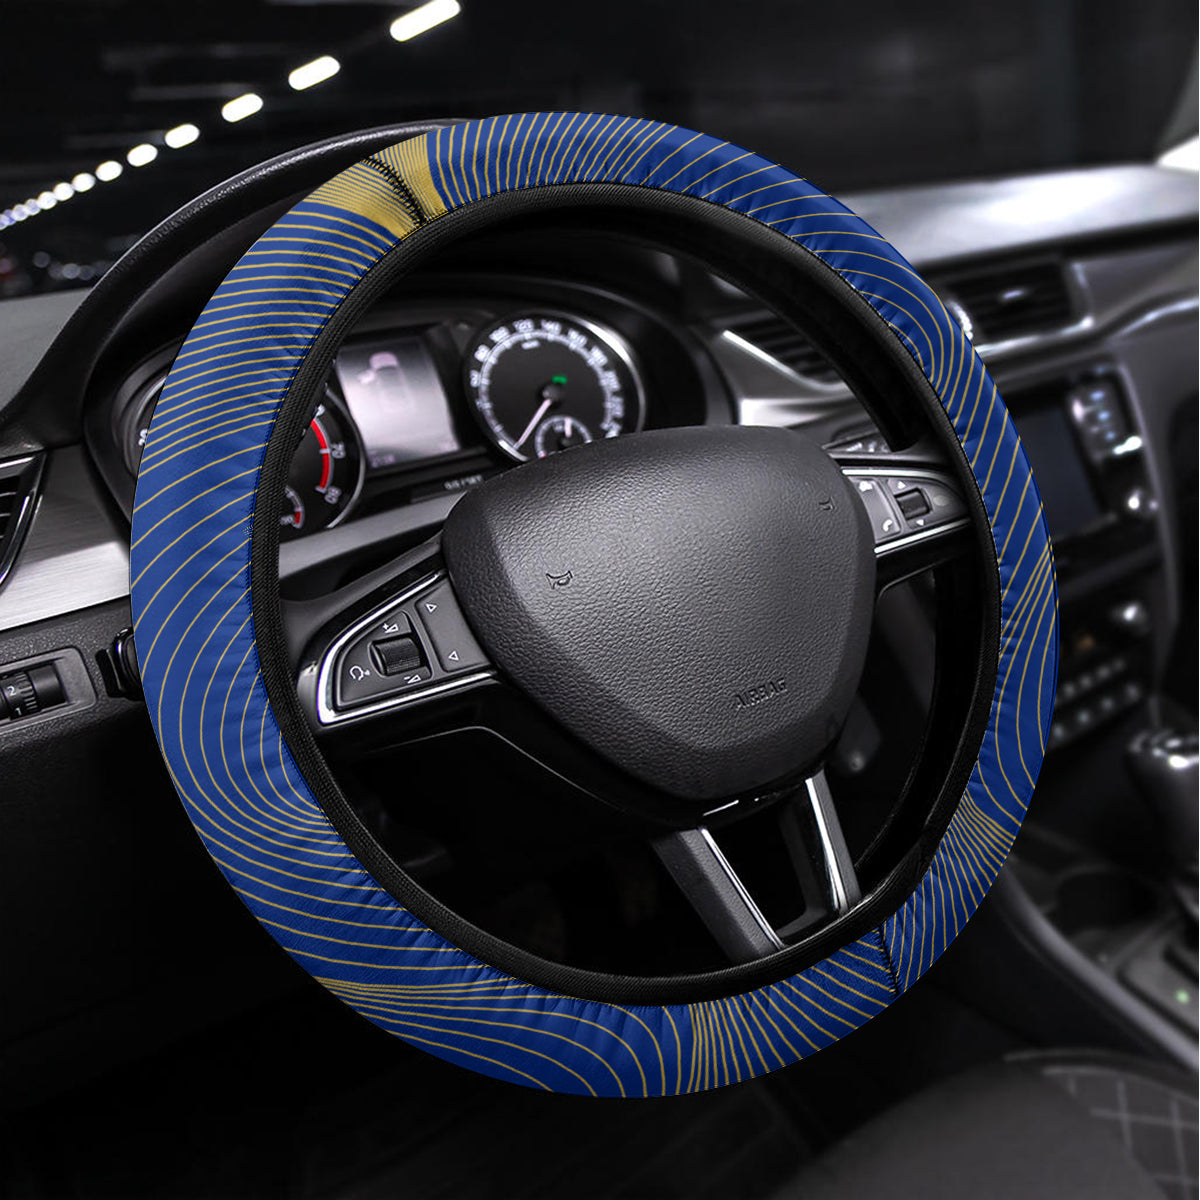 Barbados Independence Day Steering Wheel Cover 30 November Happy Anniversary Barbadian